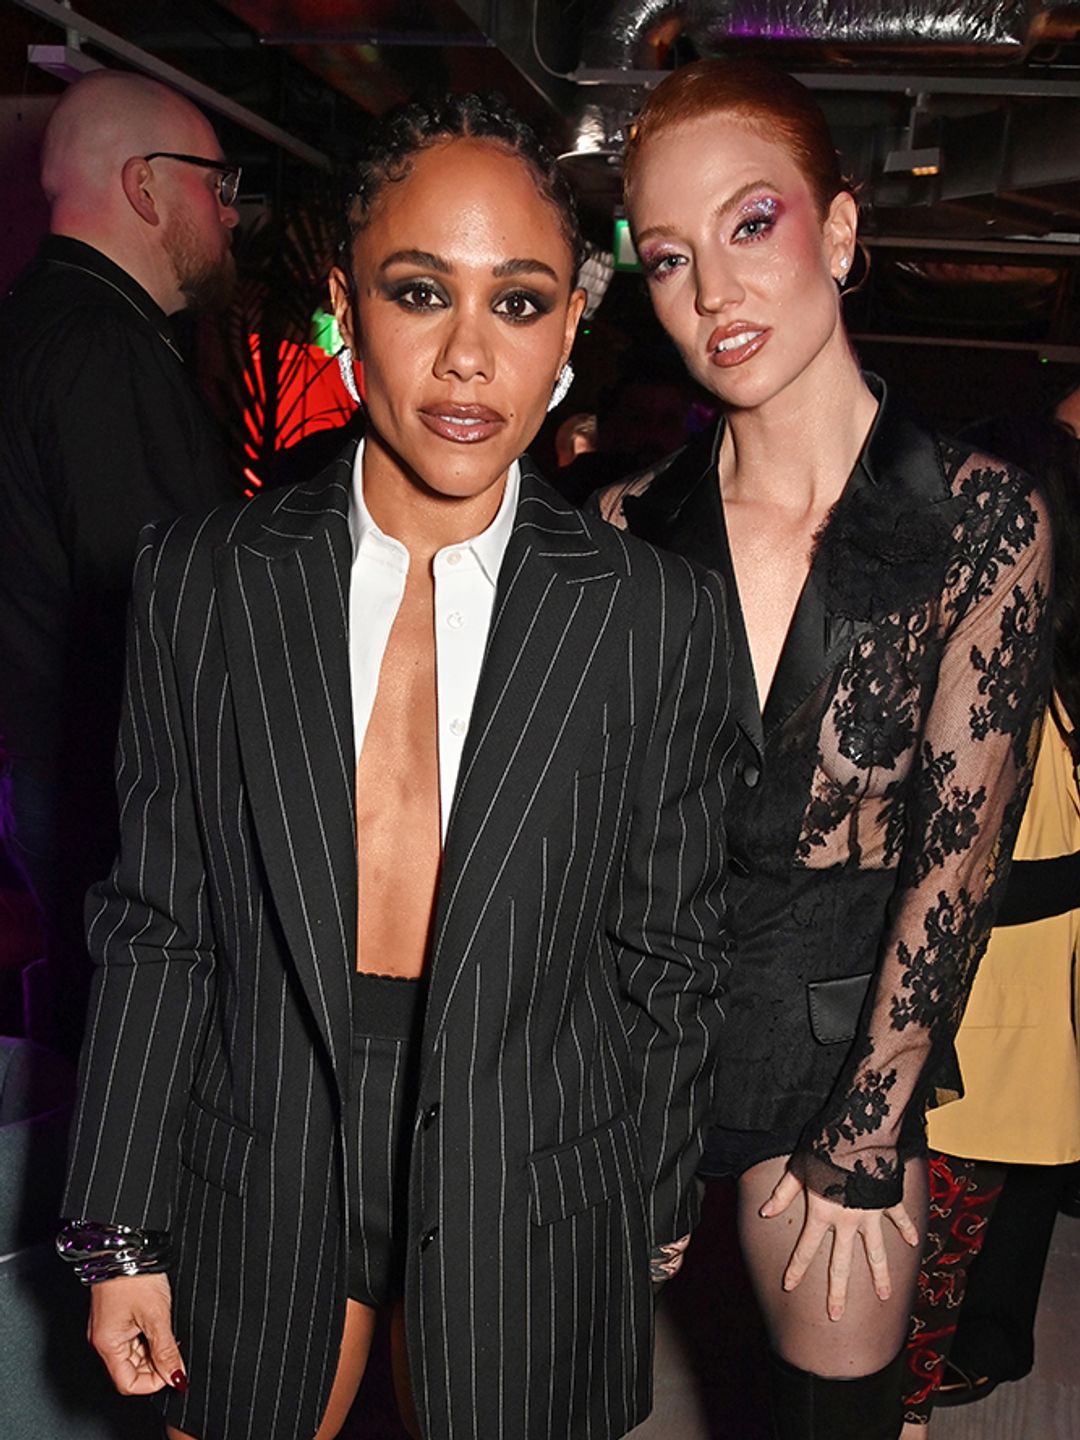 Alex Scott and Jess Glynne at a Brits after party